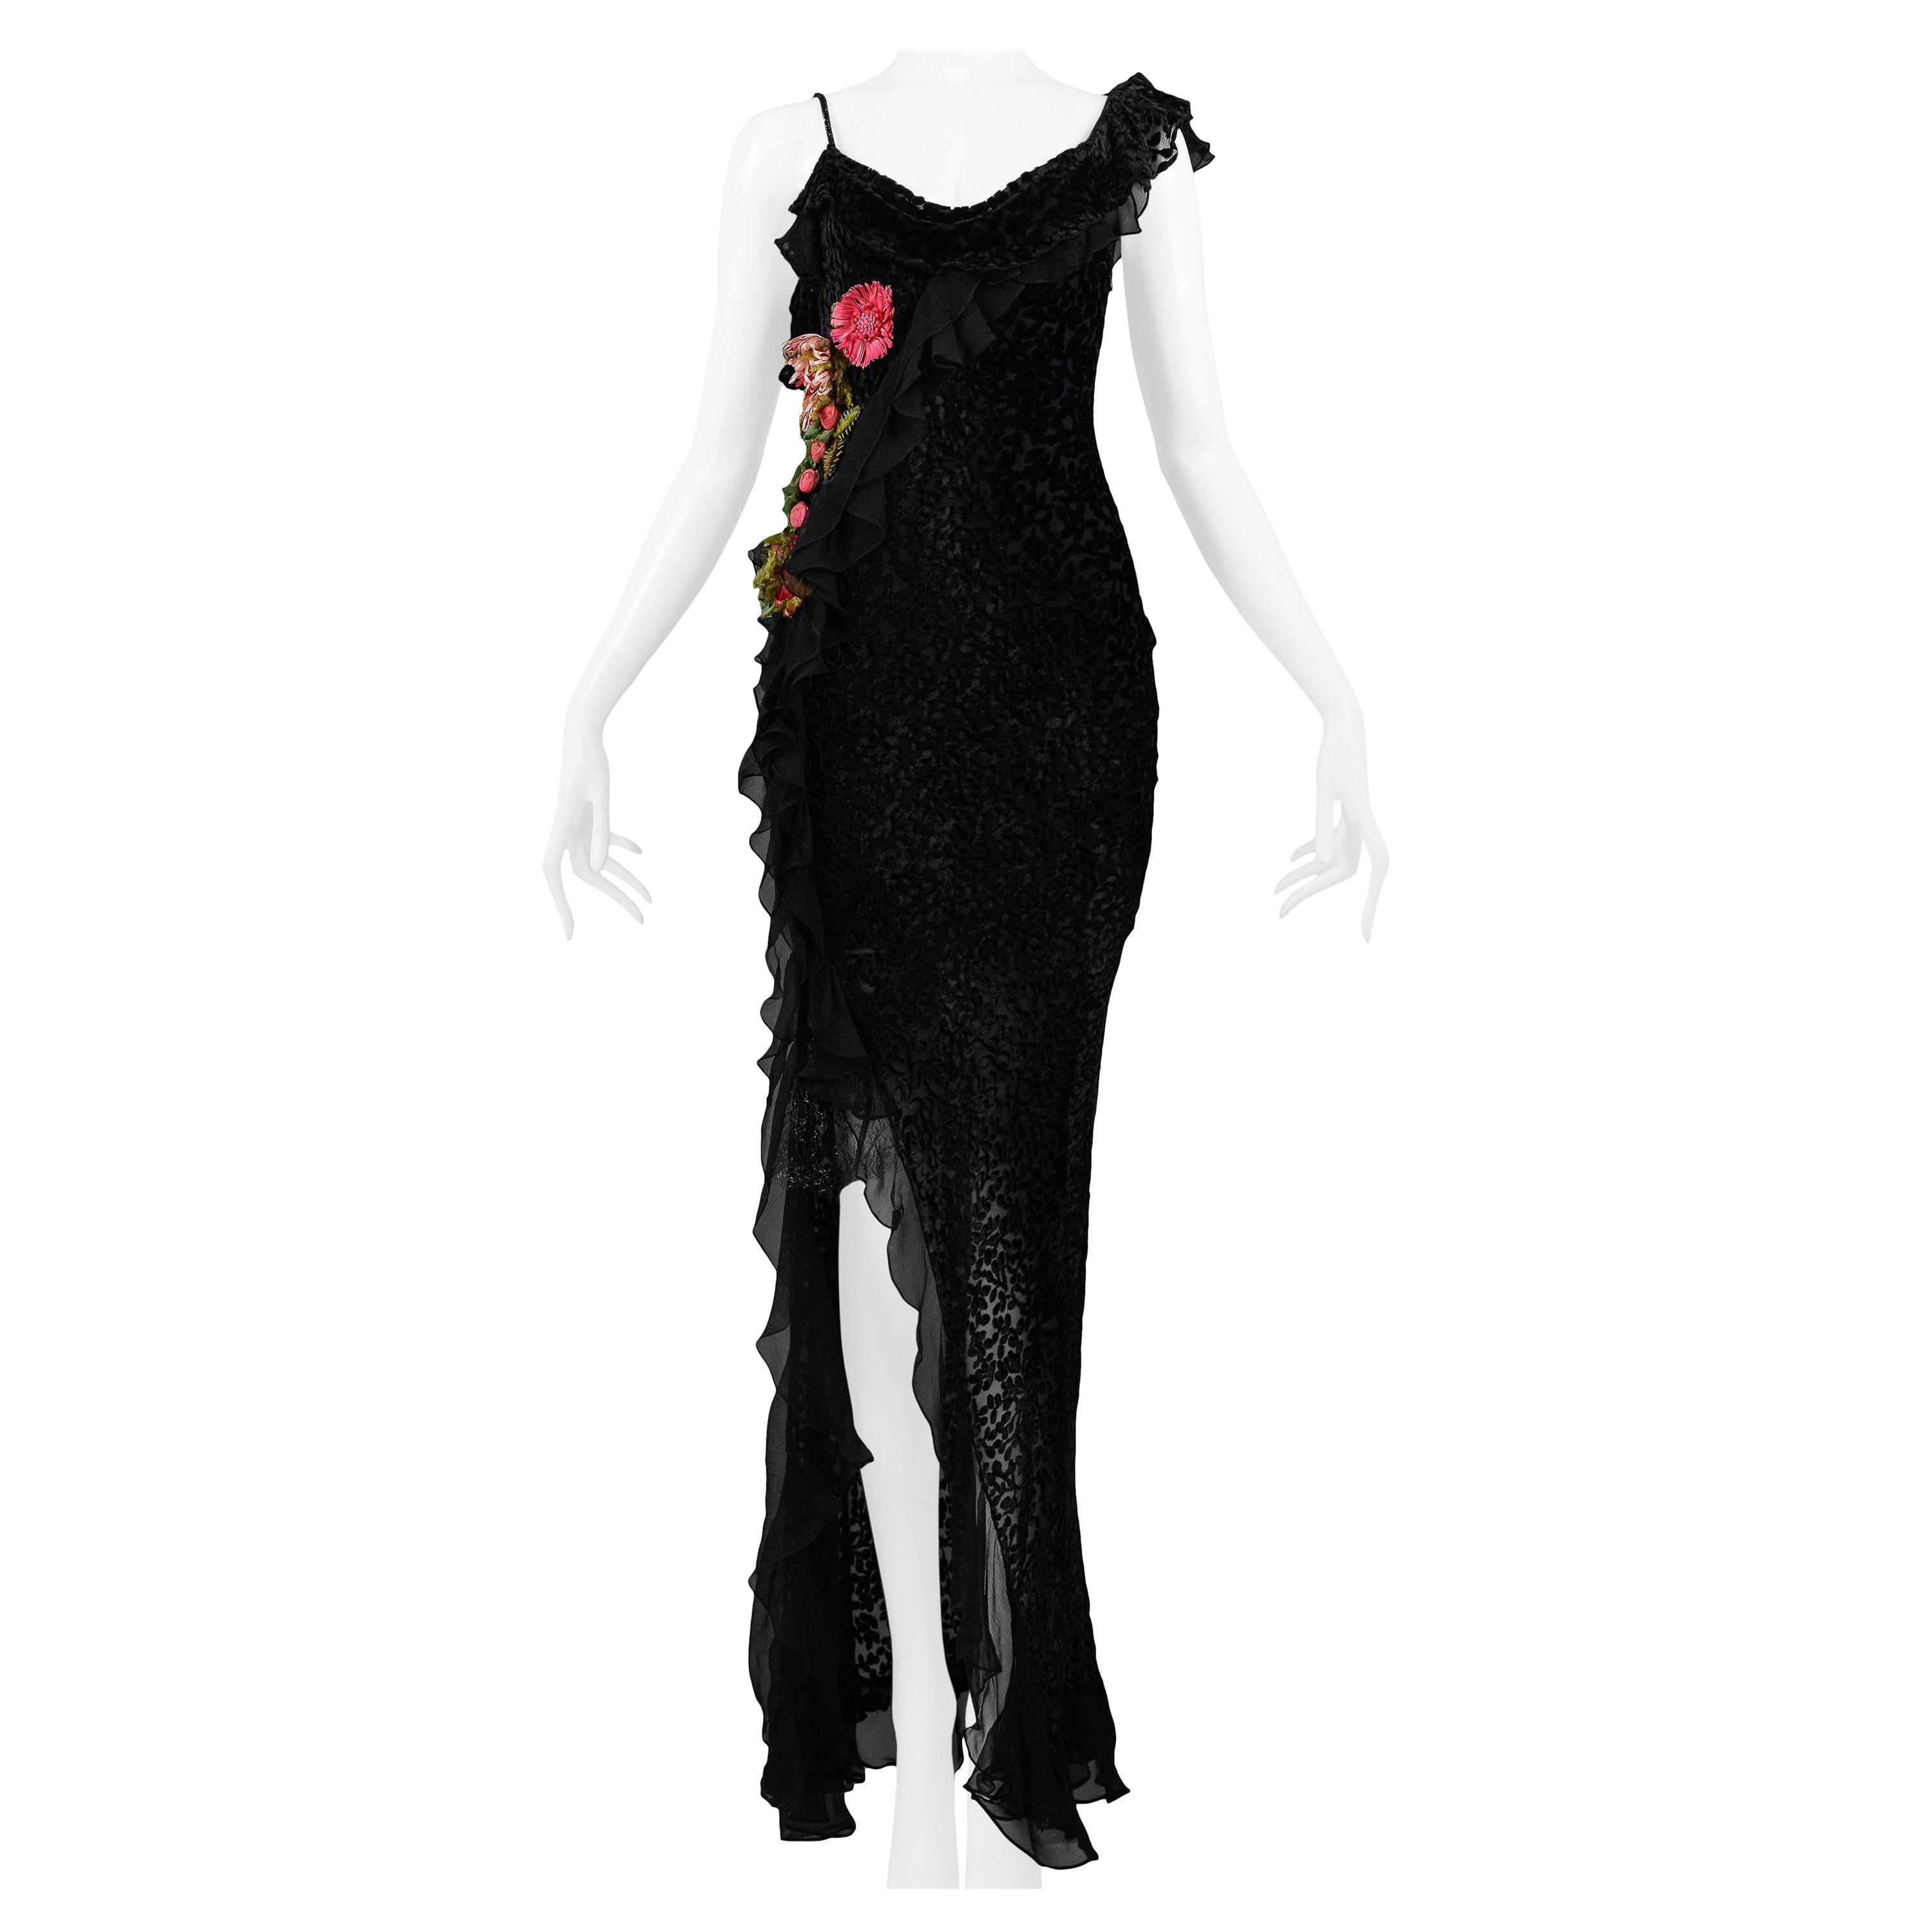 Dior by Galliano Black Velvet Devore Gown with Flowers 2002